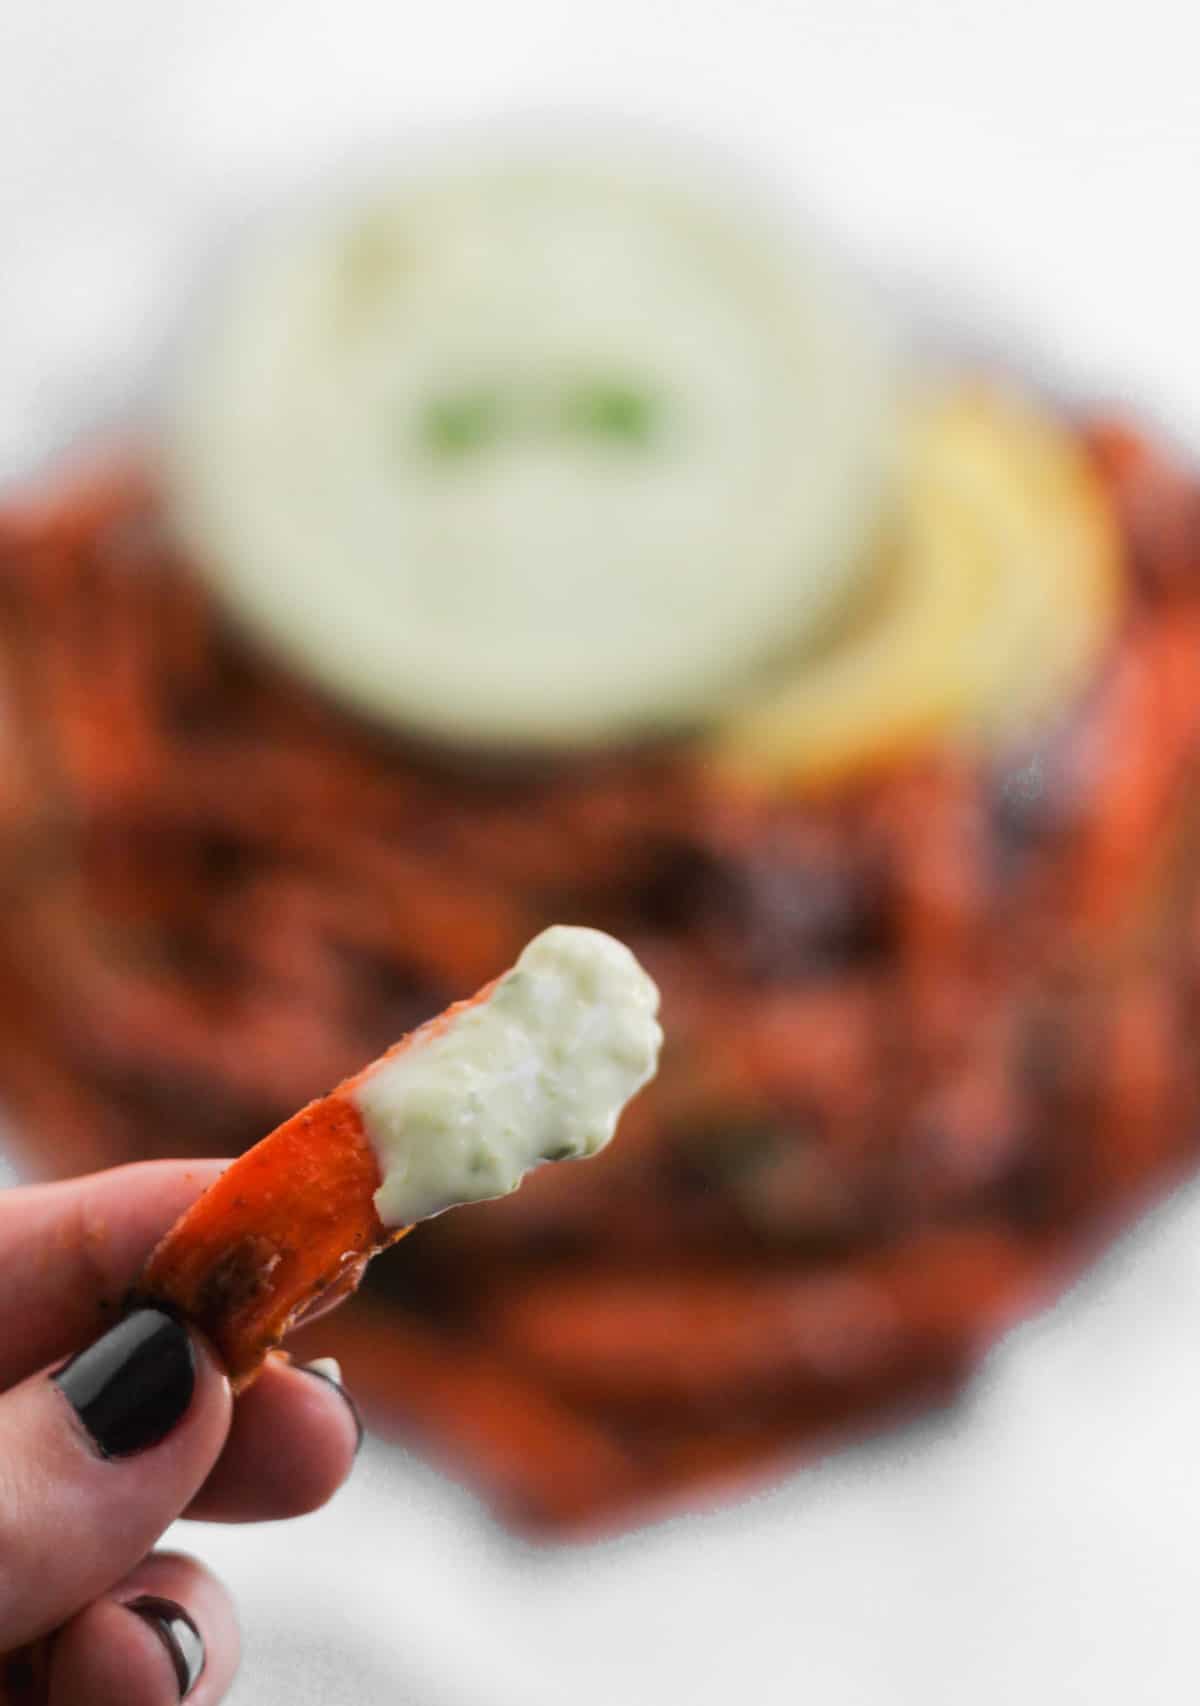 A single carrot fry dipped in pesto aioli with a serving platter of air fryer carrot fries blurred in the background.